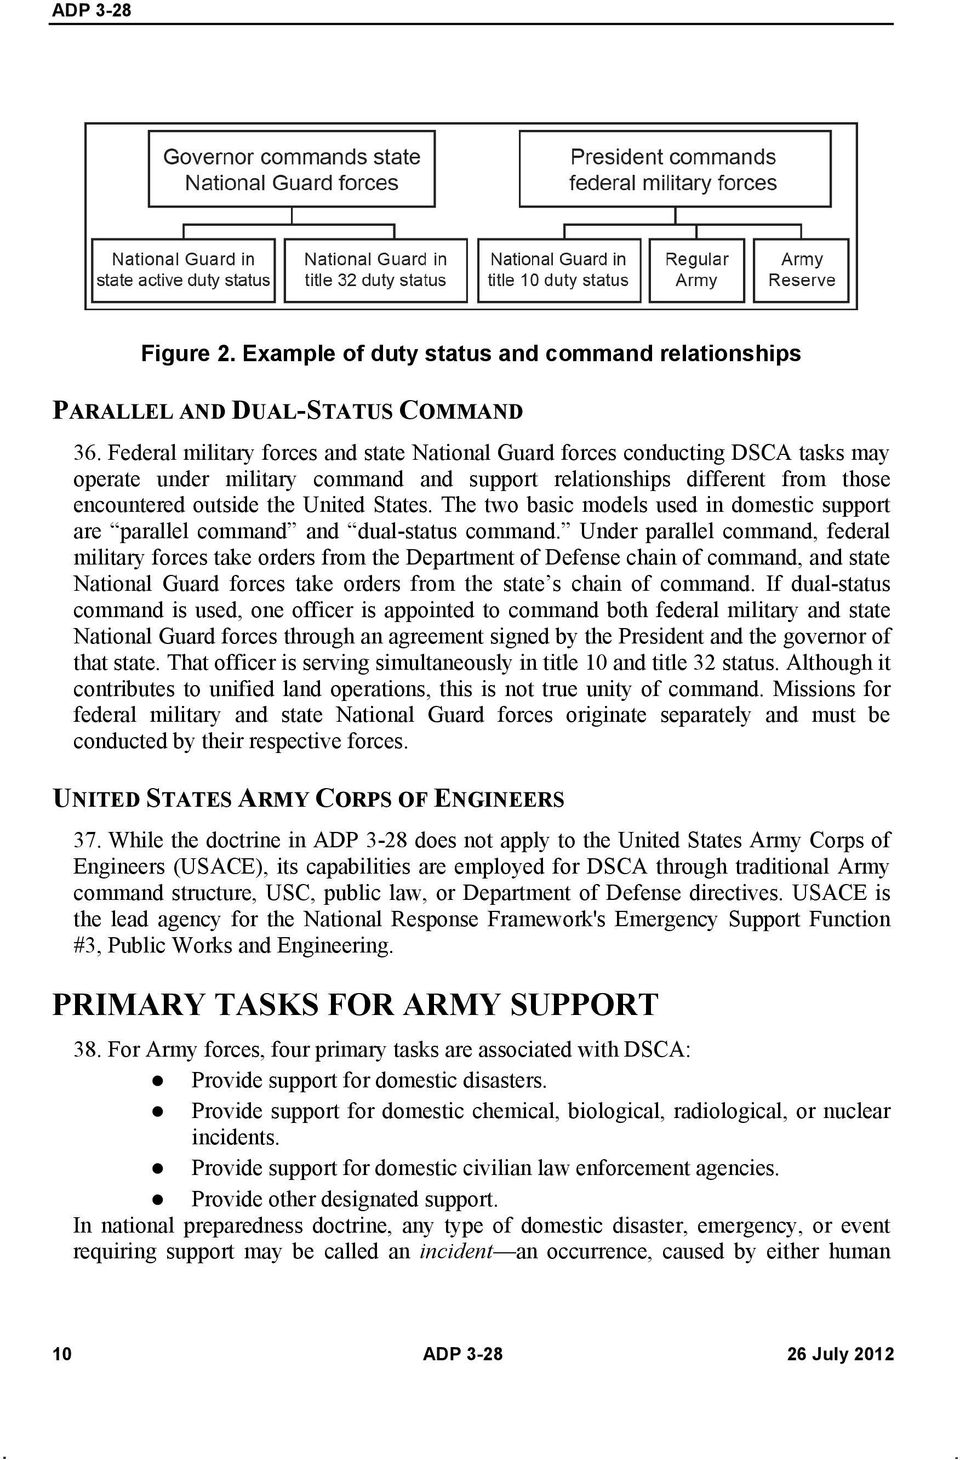 The two basic models used in domestic support are parallel command and dual-status command.